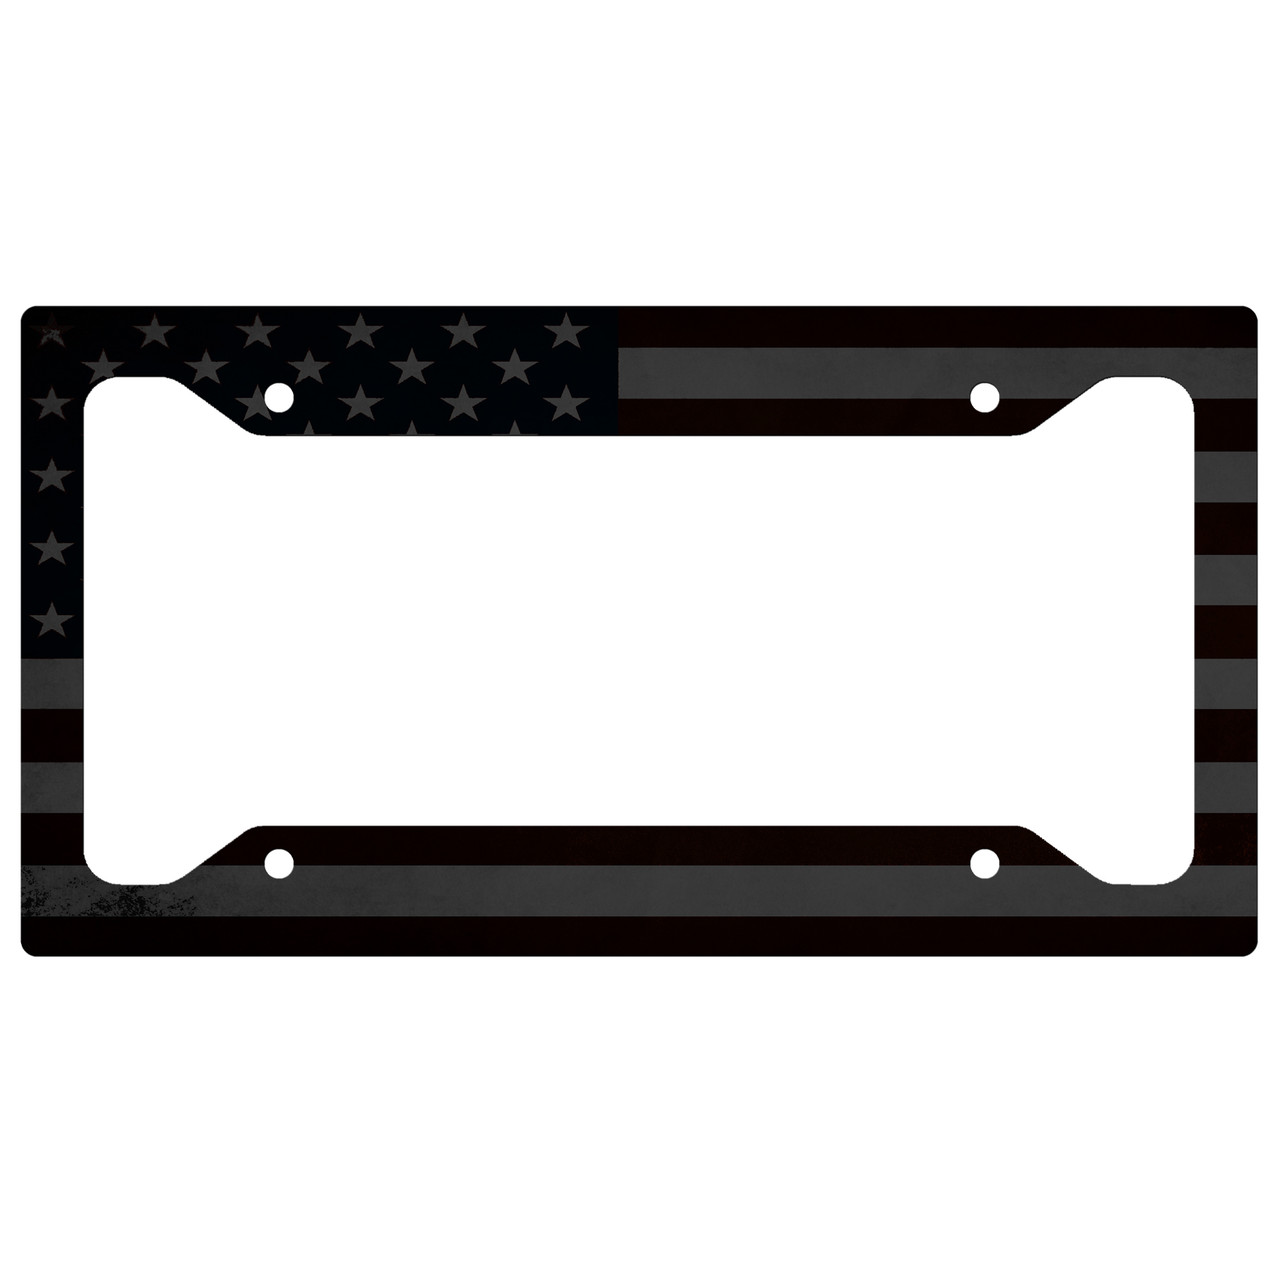 Louis Name Pride Flag Style License Plate Tag Vanity Novelty Metal, UV  Printed Metal, 6-Inches By 12-Inches, Car Truck RV Trailer Wall Shop Man  Cave